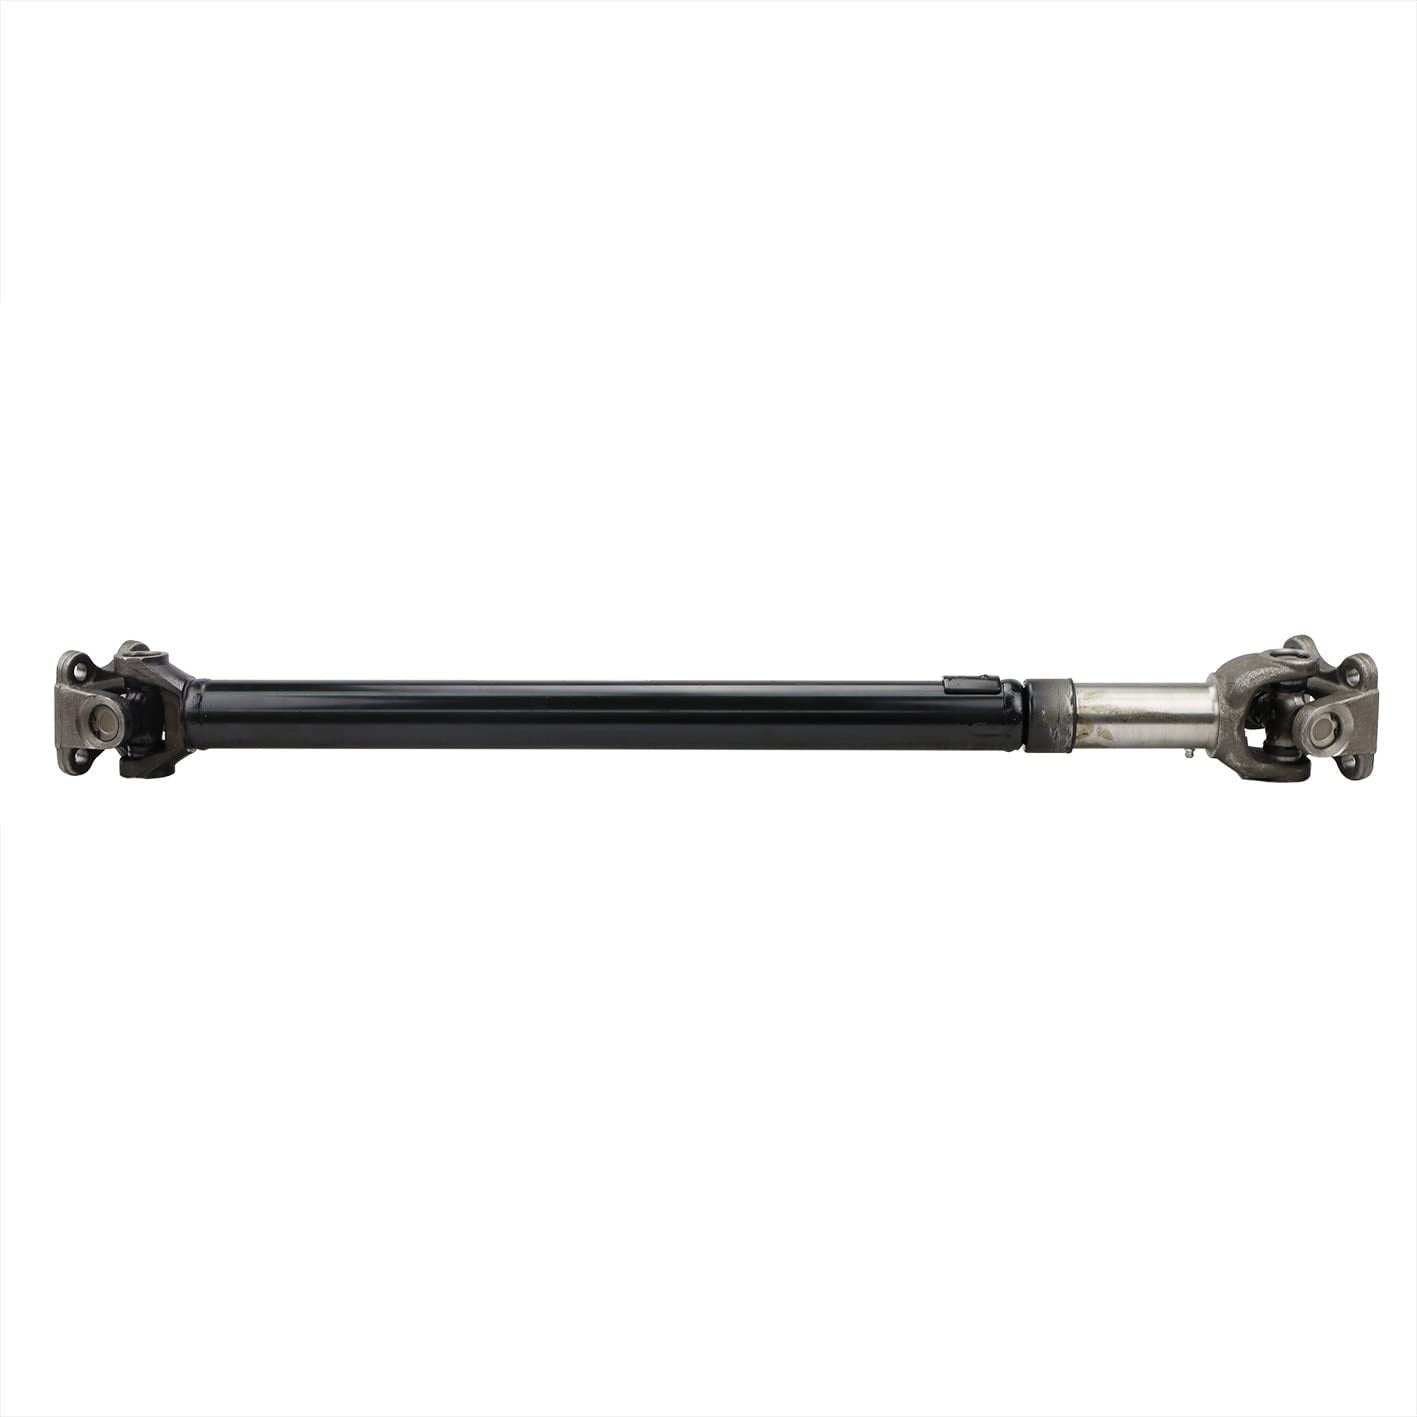 36 1/4" Rear Drive Shaft Prop-Shaft Assembly for 1989-1990 Ford Bronco 1989 Ford Bronco Ii Rear Drive Shaft